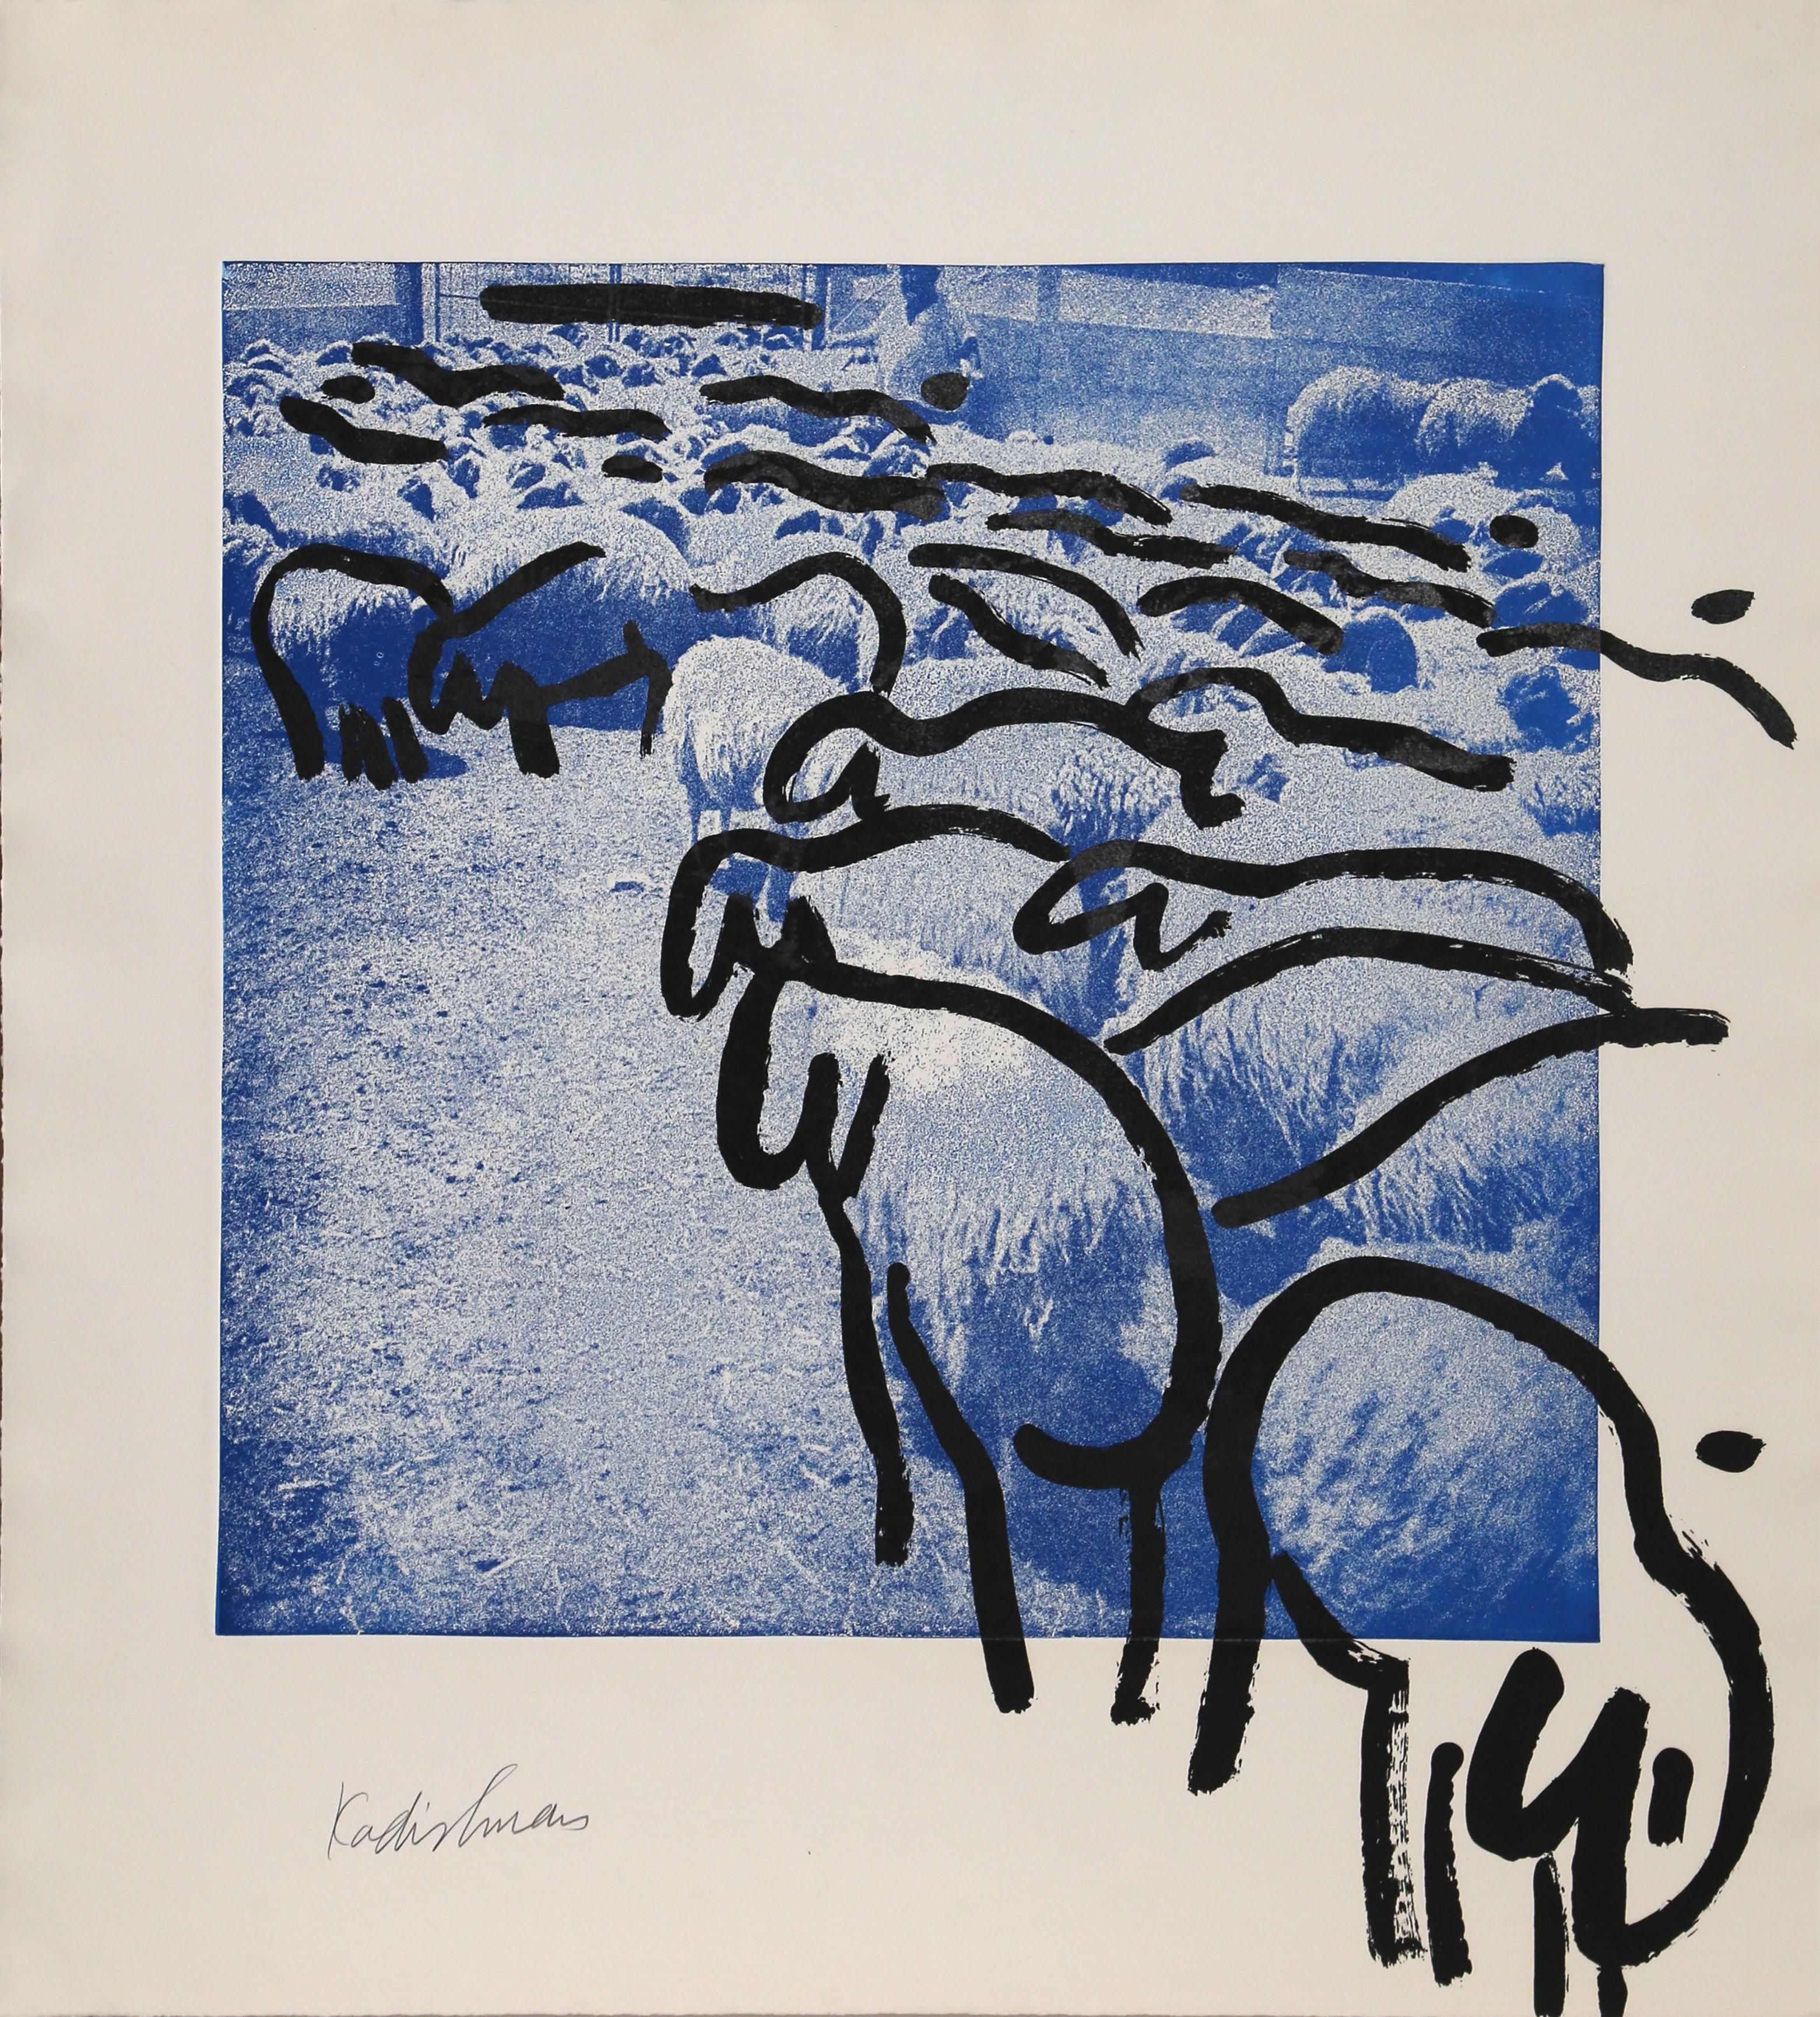 Artist:  Menashe Kadishman, Israeli (1932 - 2015)
Title:	Sheep 7
Year:	1981
Medium: Serigraph and Etching, signed in pencil
Edition: 65, AP 5
Size: 33.5 x 31 in. (85.09 x 78.74 cm)